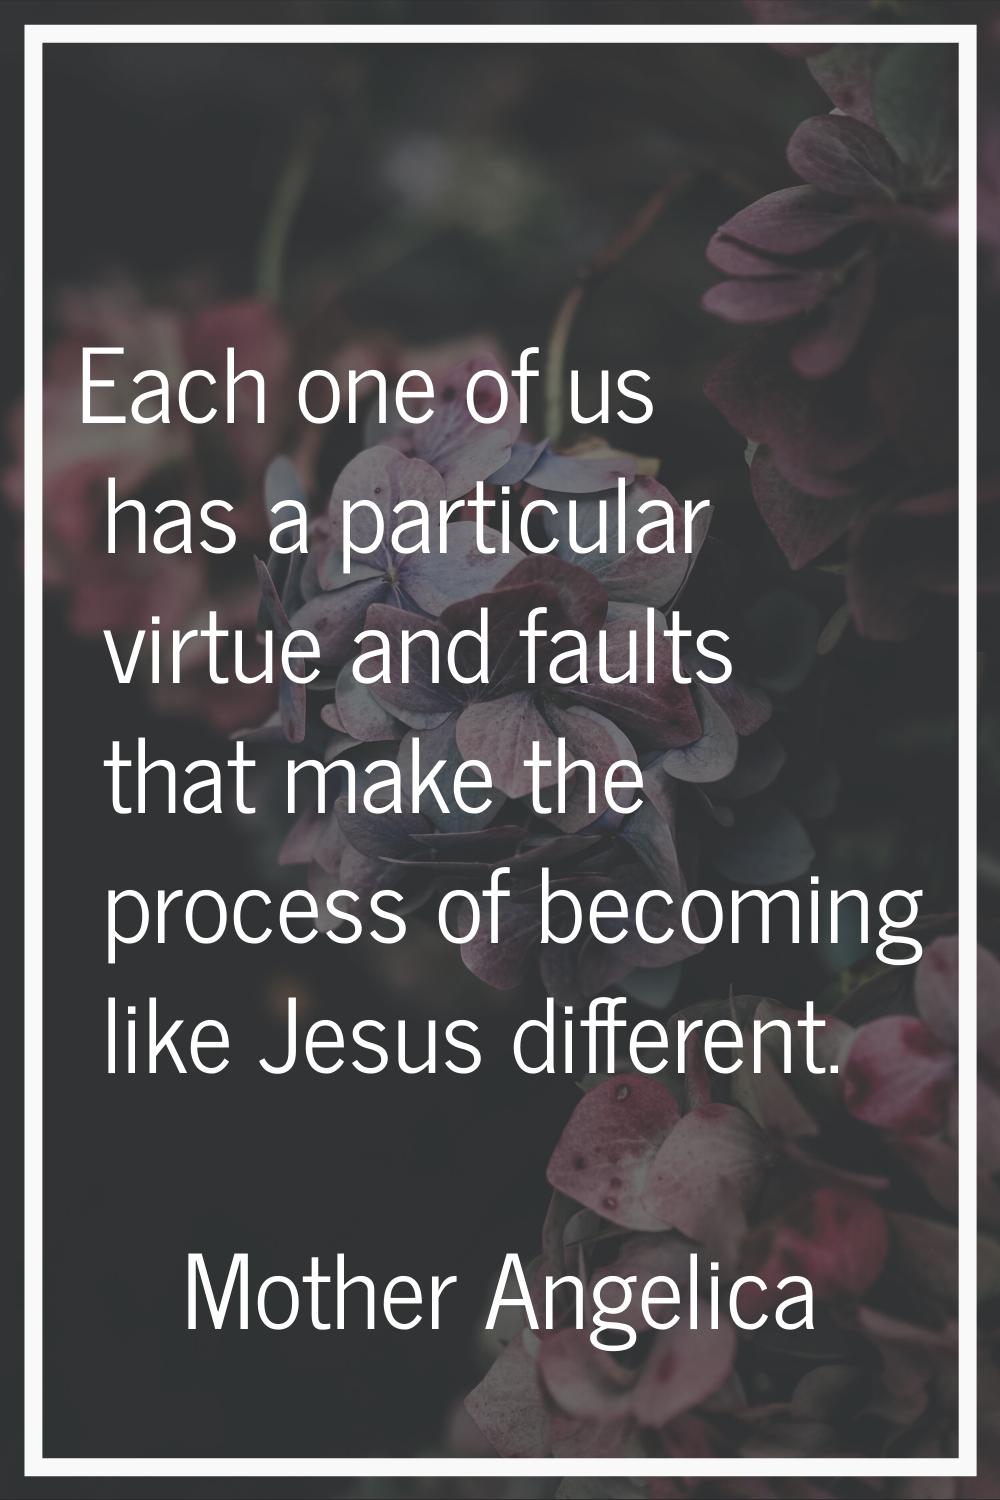 Each one of us has a particular virtue and faults that make the process of becoming like Jesus diff